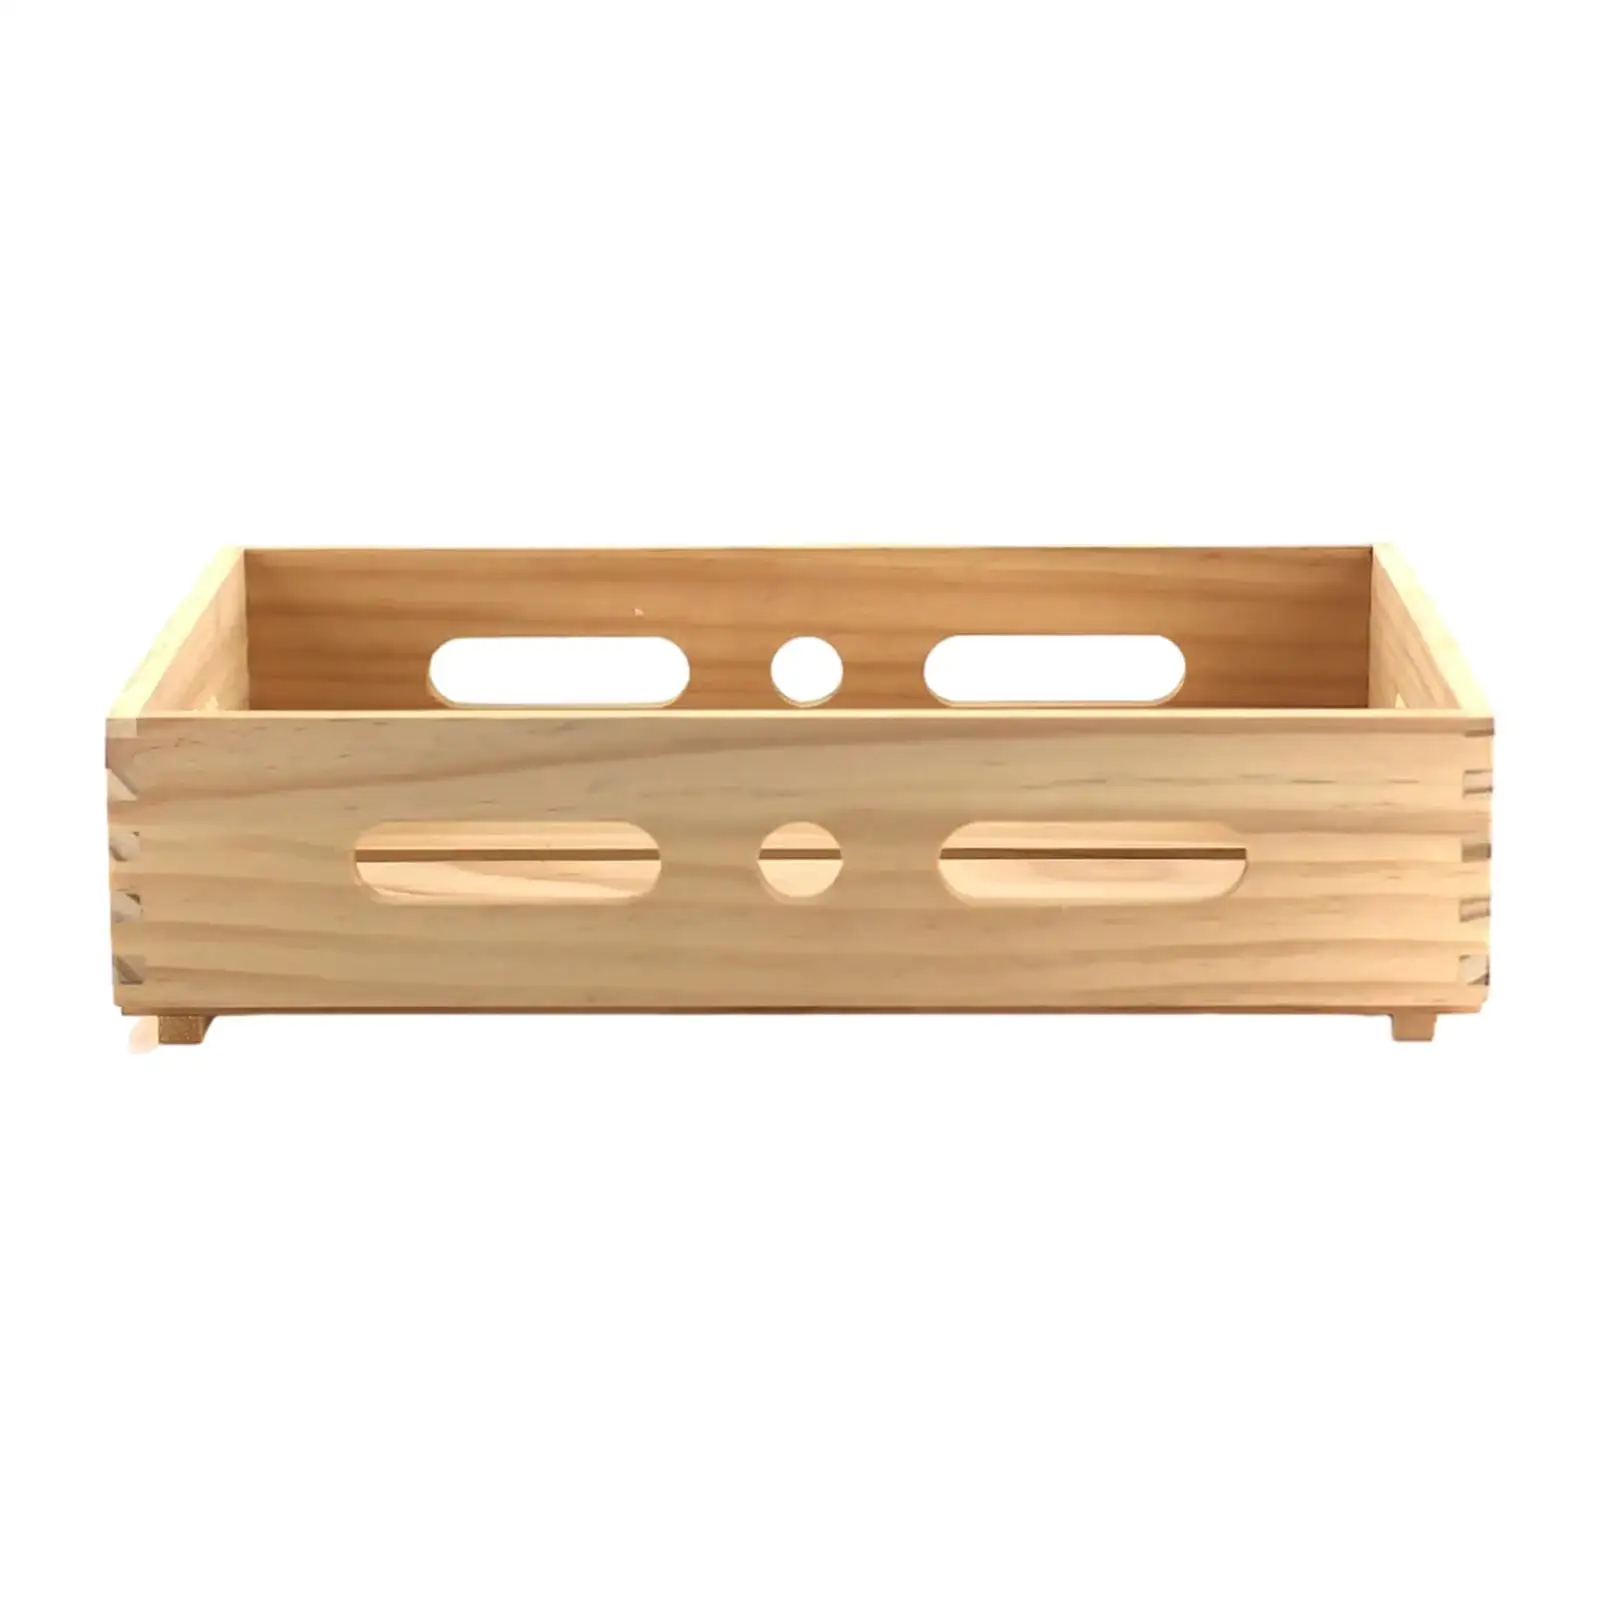 Bathroom Wooden Soap Dish Soap Holder Stand Soap Tray Ventilated Self Draining Compact Soap Drying Rack for Kitchen Countertop